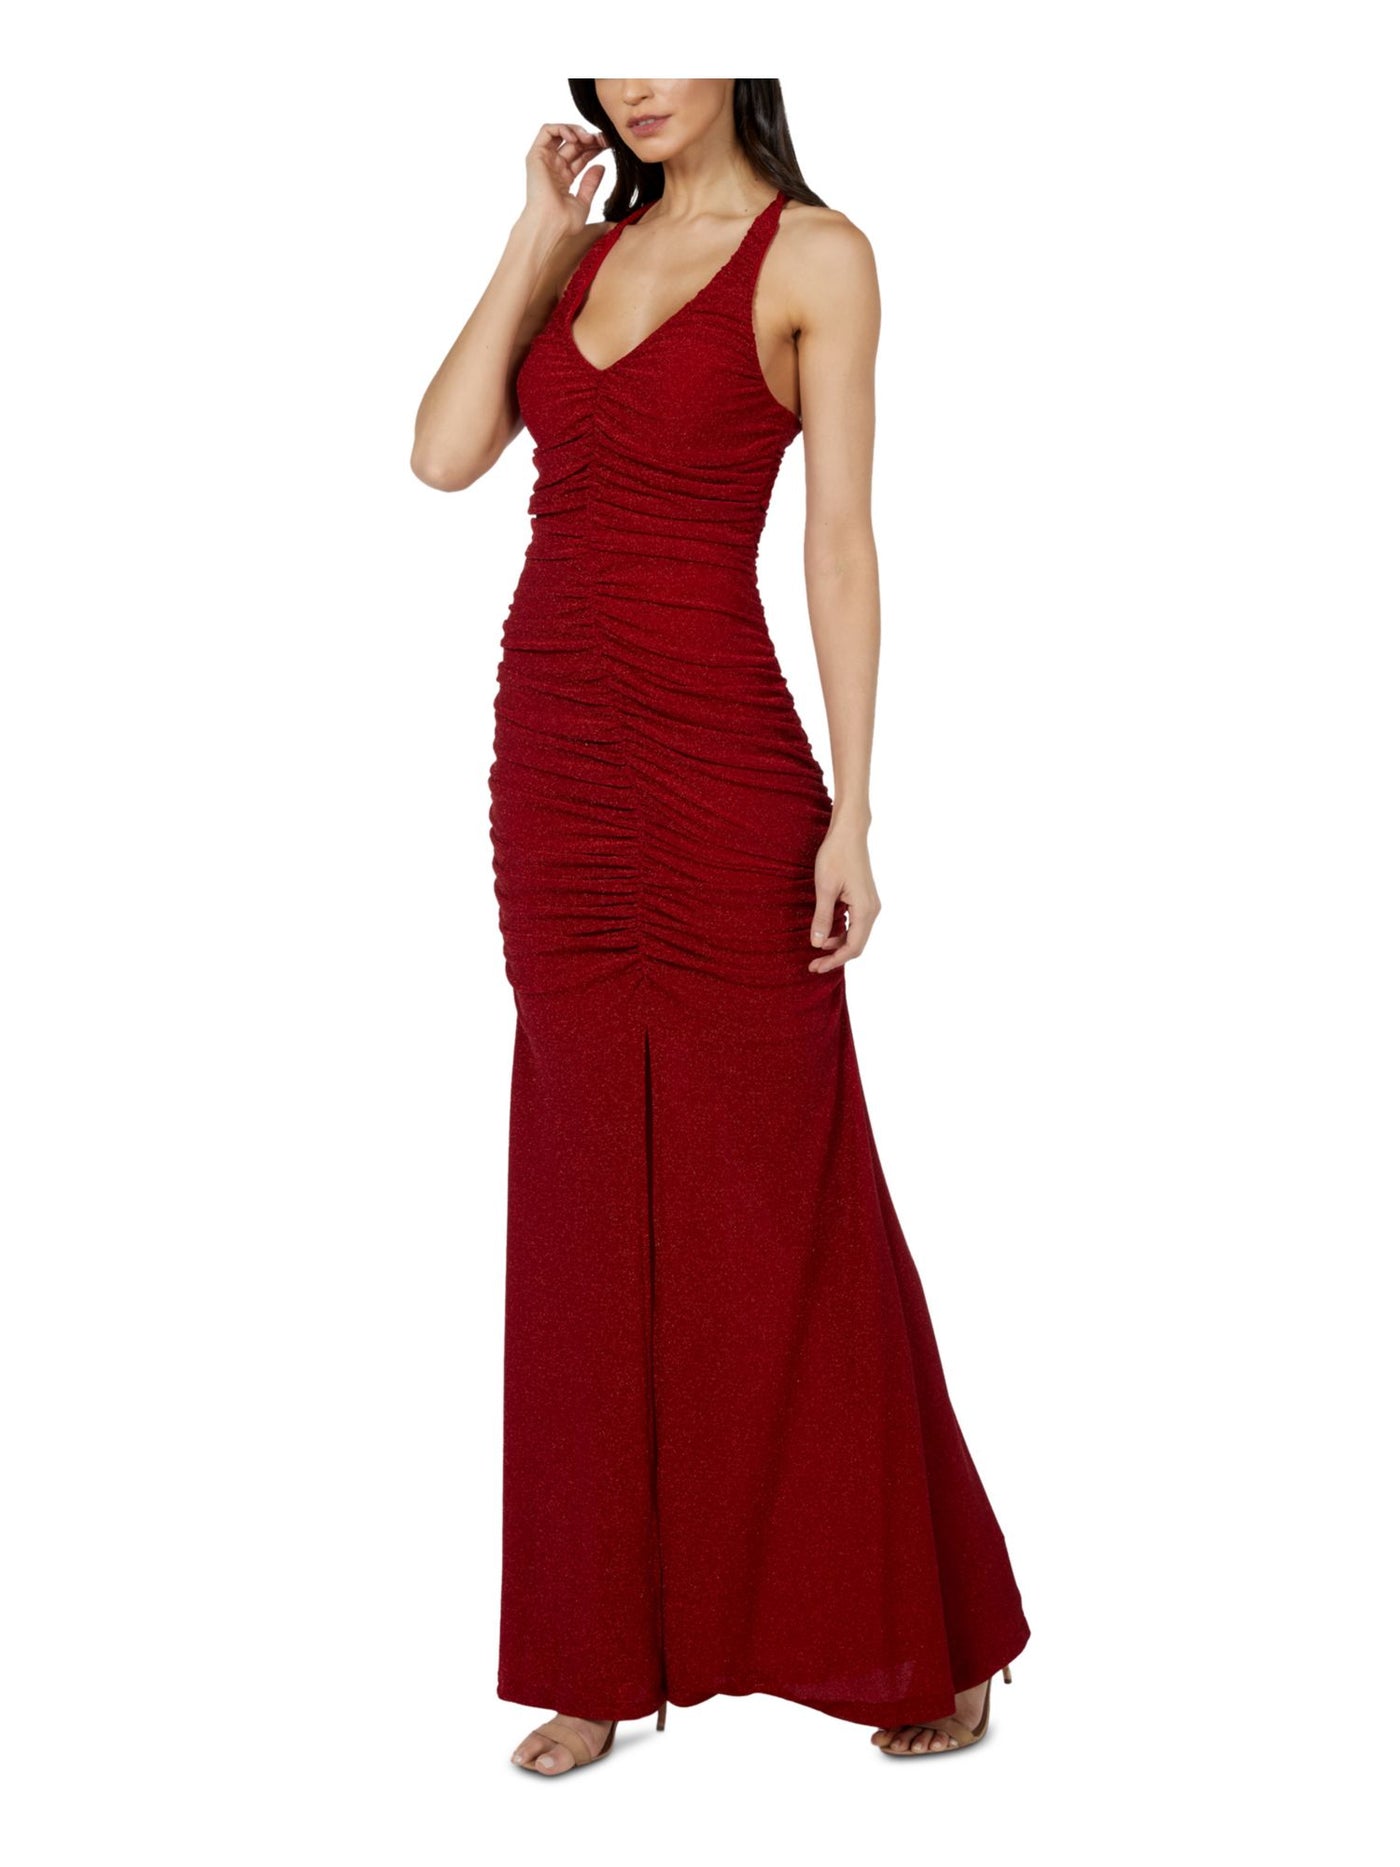 JUMP APPAREL Womens Red Stretch Zippered Glitter Ruched Sleeveless V Neck Maxi Formal Gown Dress Juniors 17/18